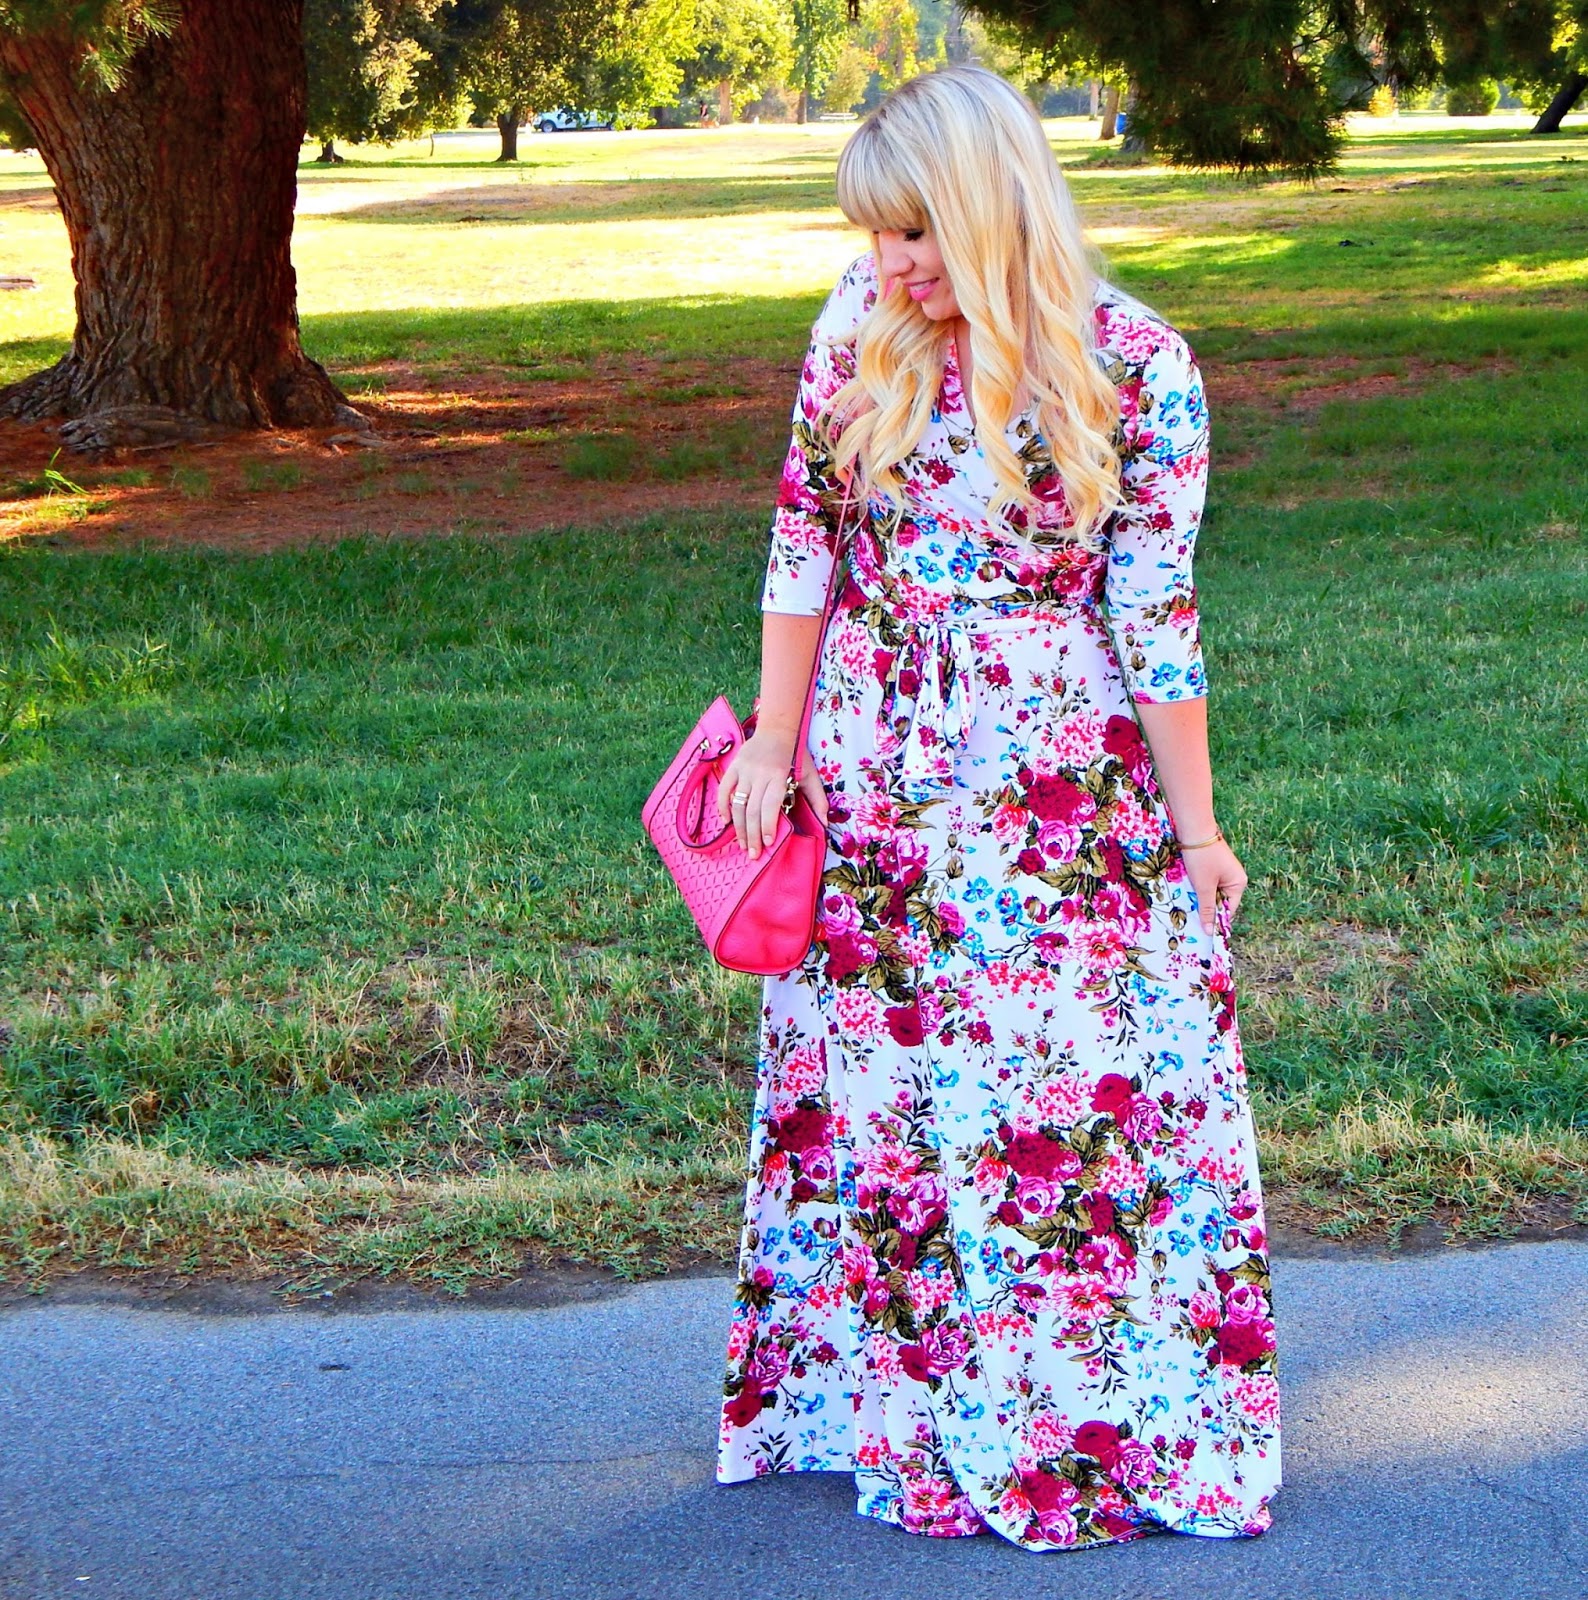 Floral Maxi Dress Outfit